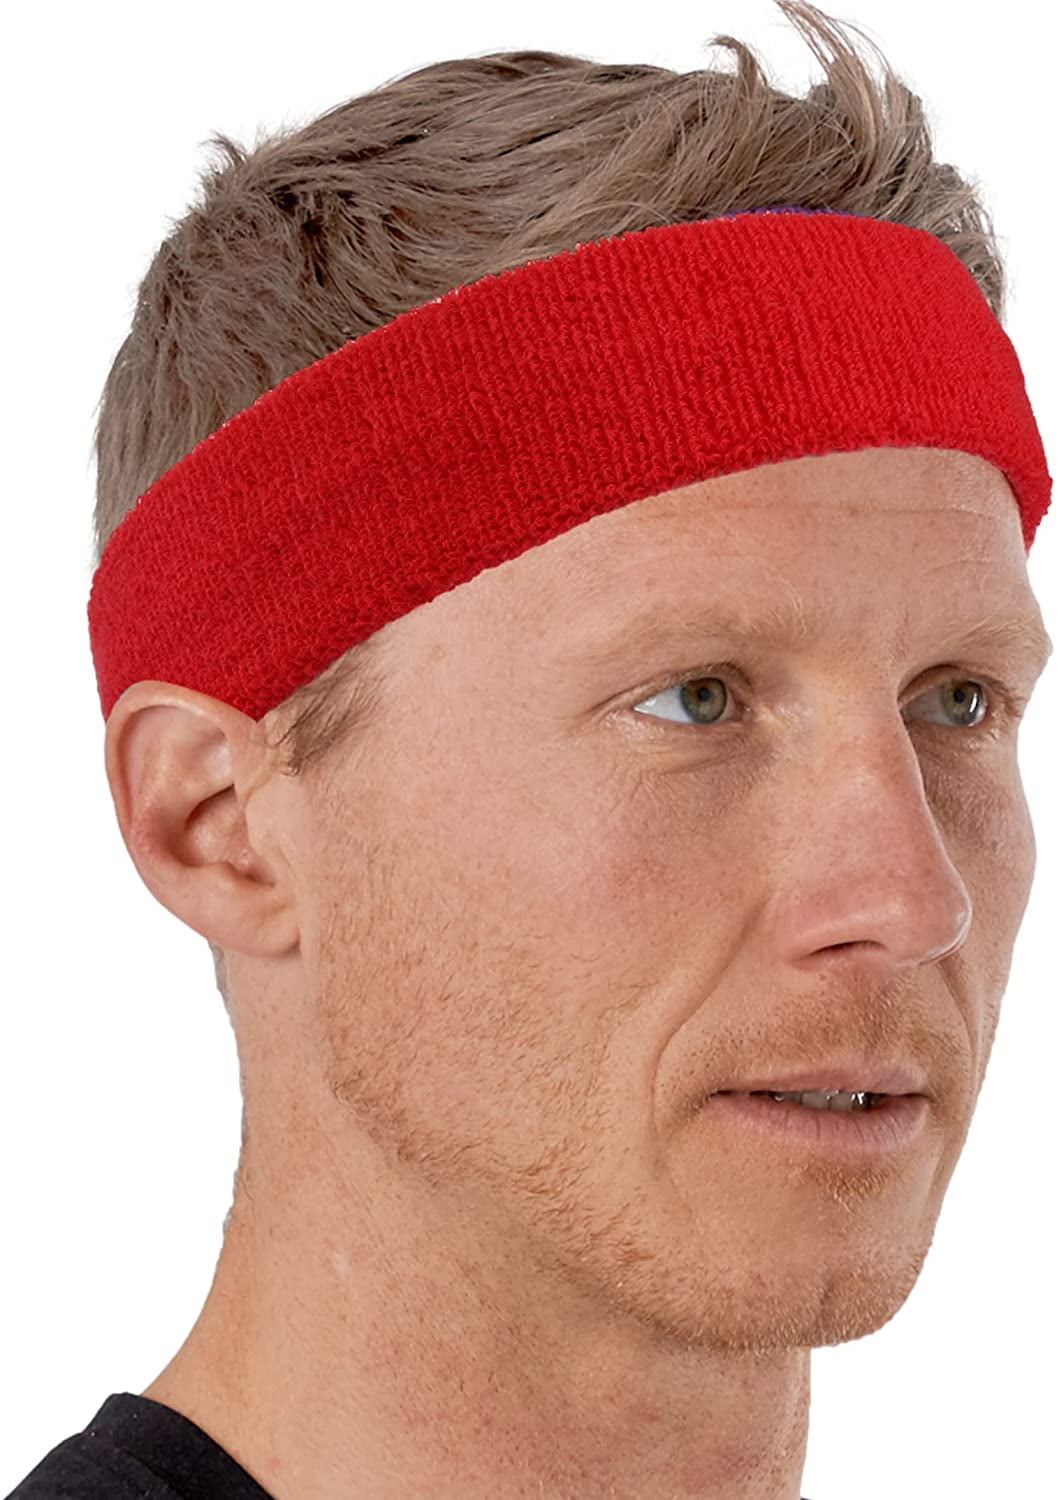 Sports Running Sweat Head Bands Football Gym Athletic Sweatbands Hair Band for Workout Tennis Basketball Yoga Exercise Cycling Mens Headband Performance Stretch Moisture Wicking Hairband 